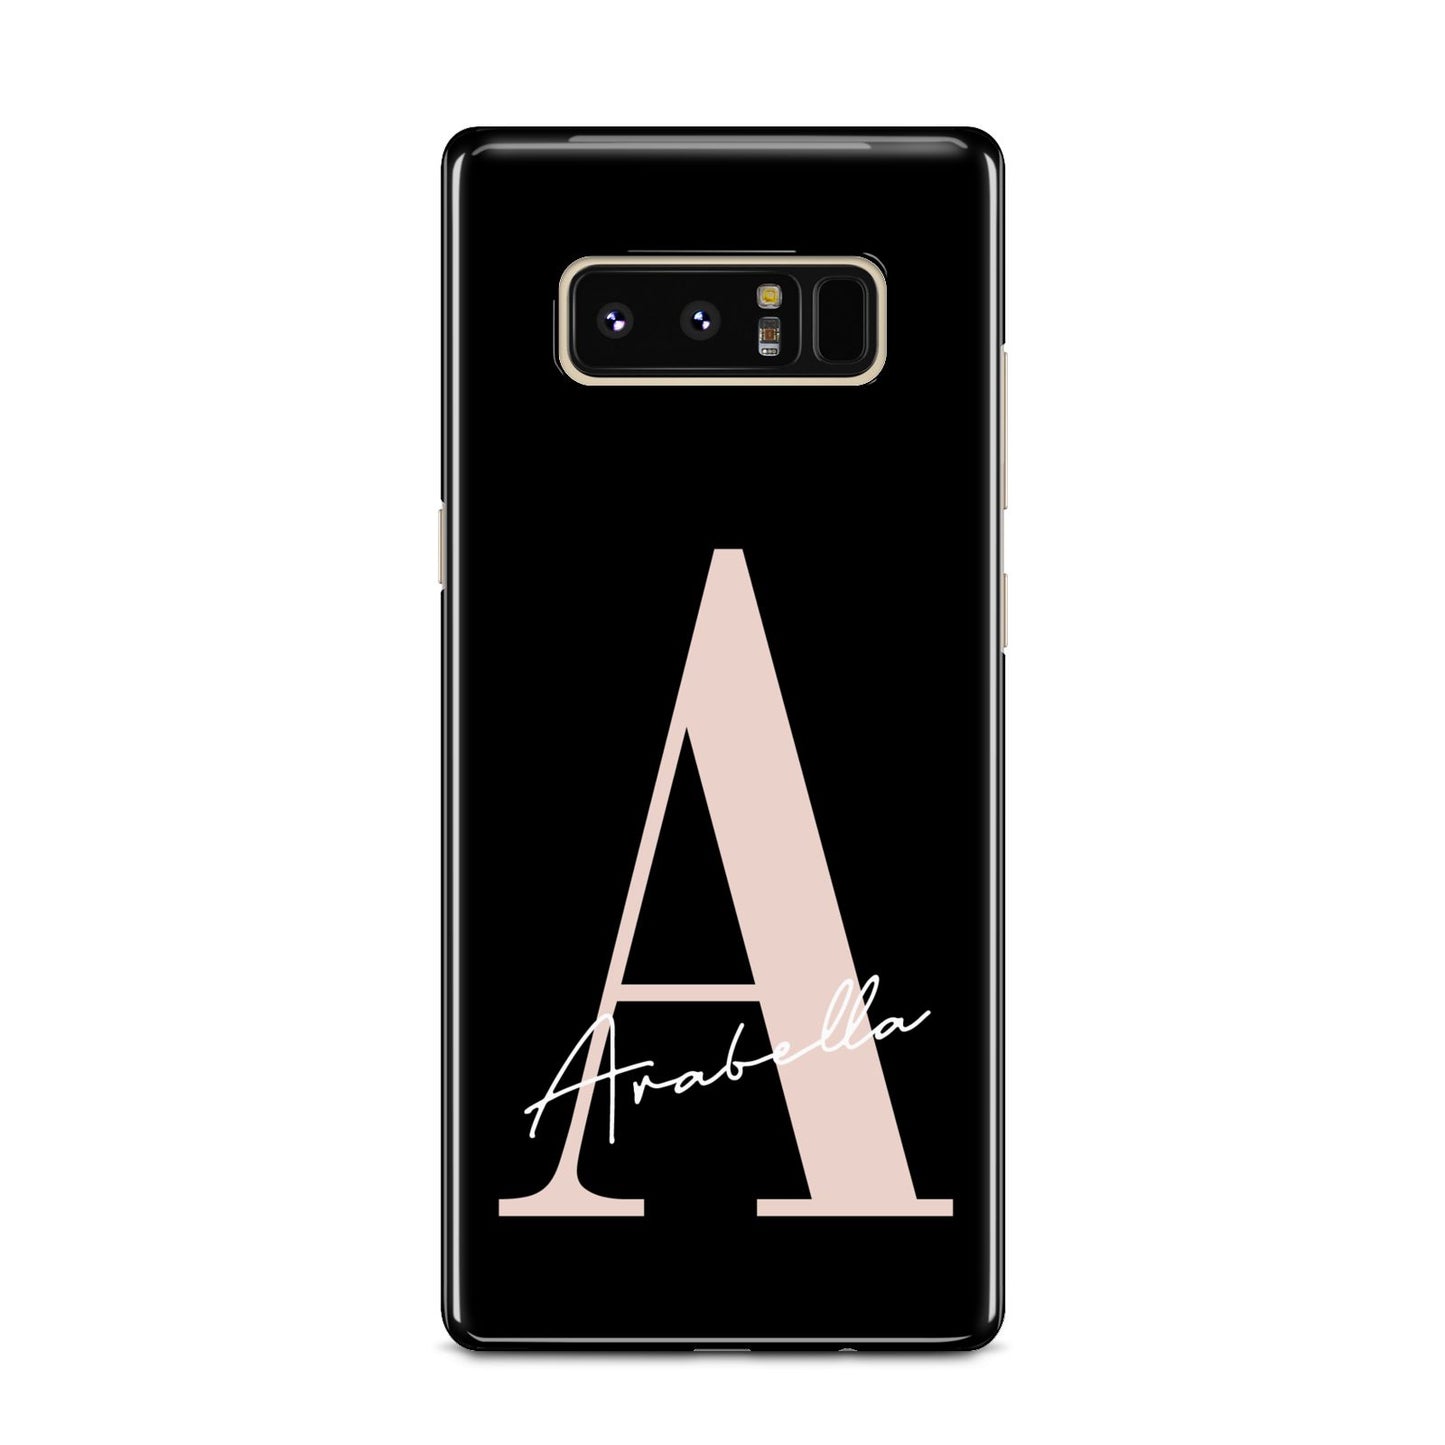 Personalised Black Pink Initial Samsung Galaxy Note 8 Case